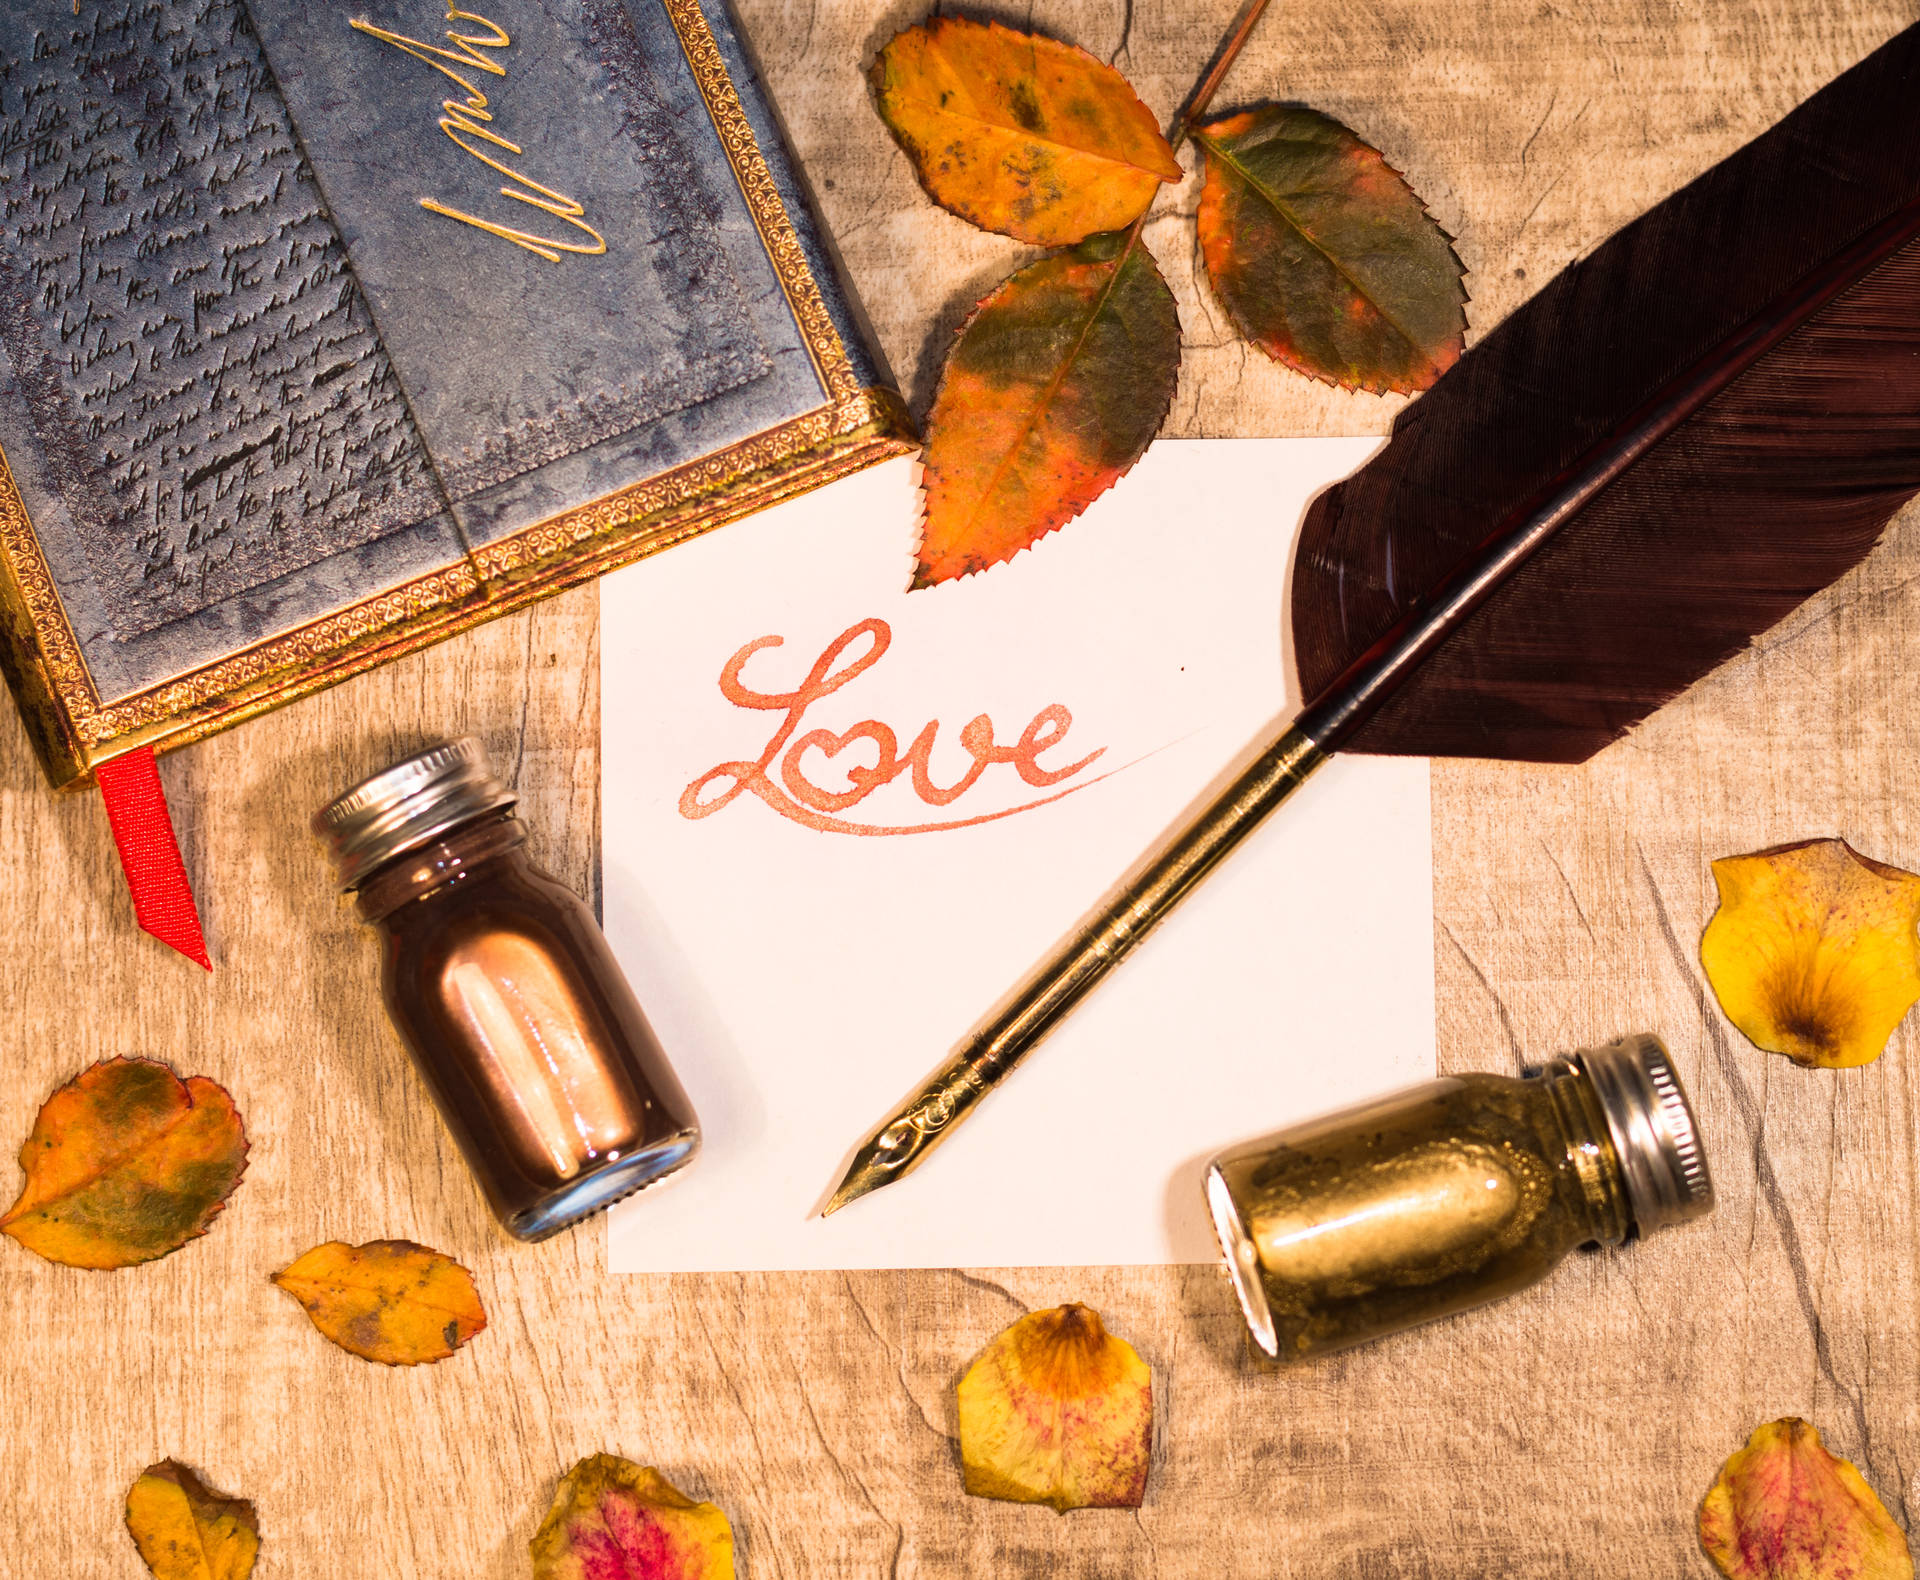 Love Letter Written With Quill